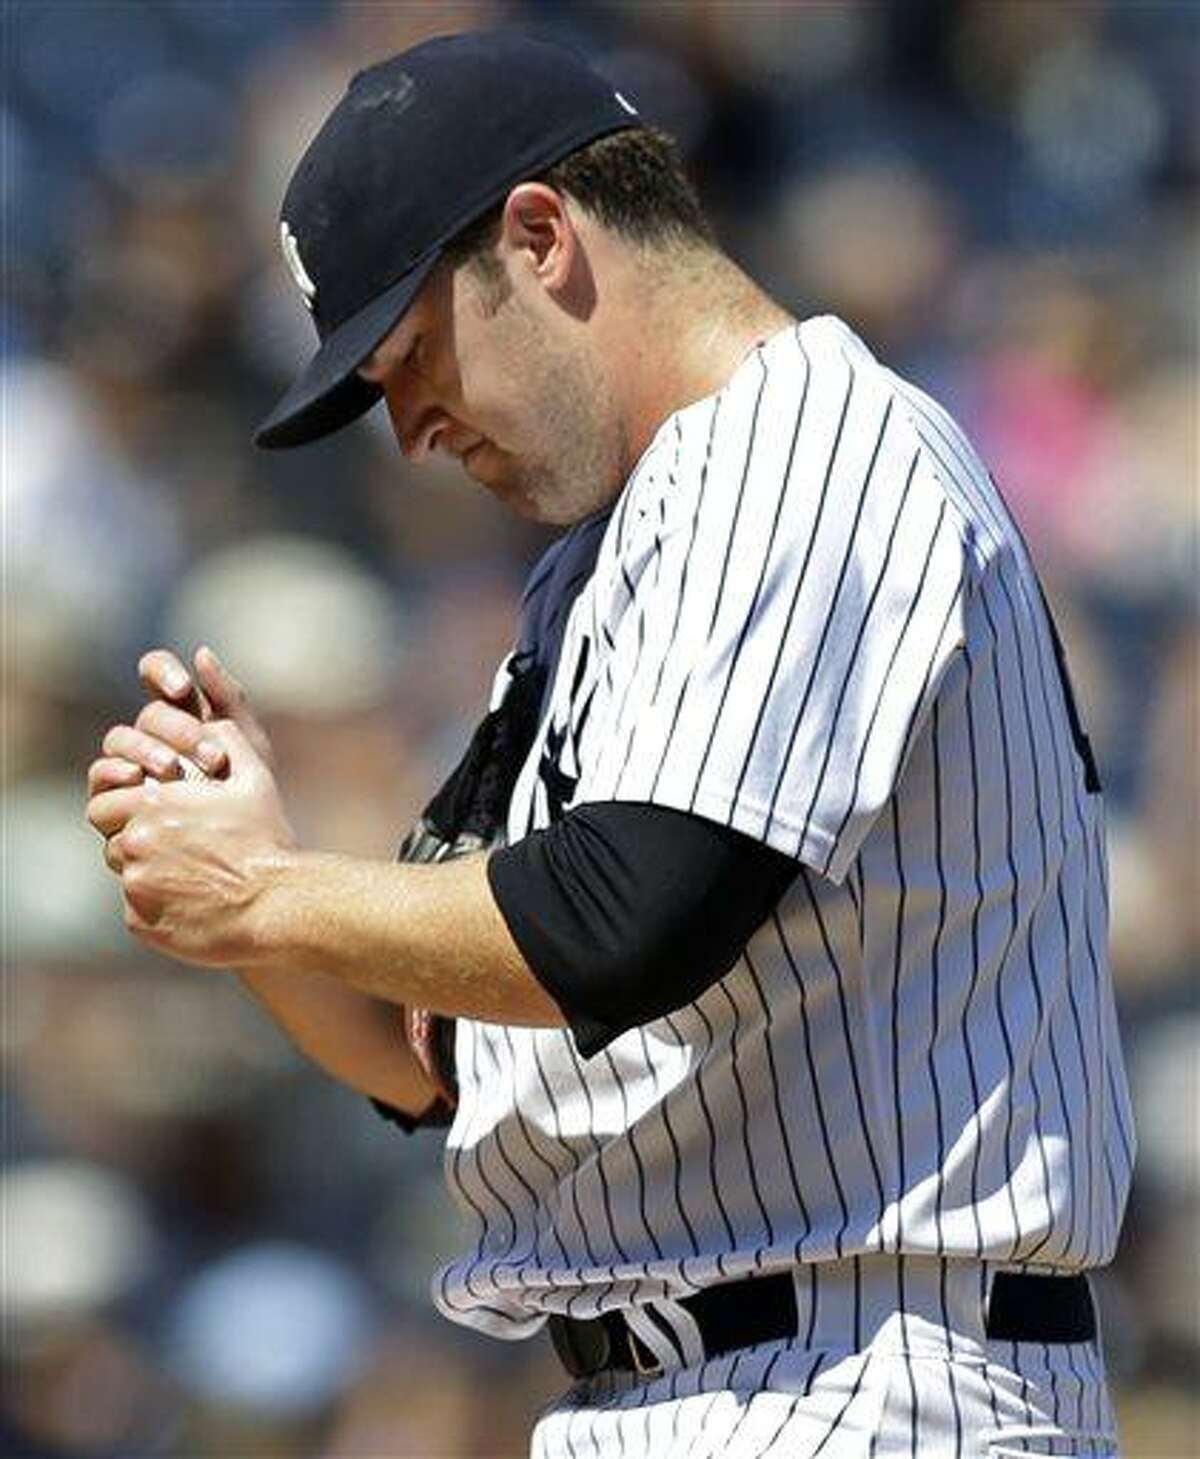 New York Yankees starting pitcher Phil Hughes reacts after allowing a fourth-inning solo home run to Los Angeles Angels' Chris Nelson in a baseball game, Thursday, Aug. 15, 2013, in New York. (AP Photo/Kathy Willens)